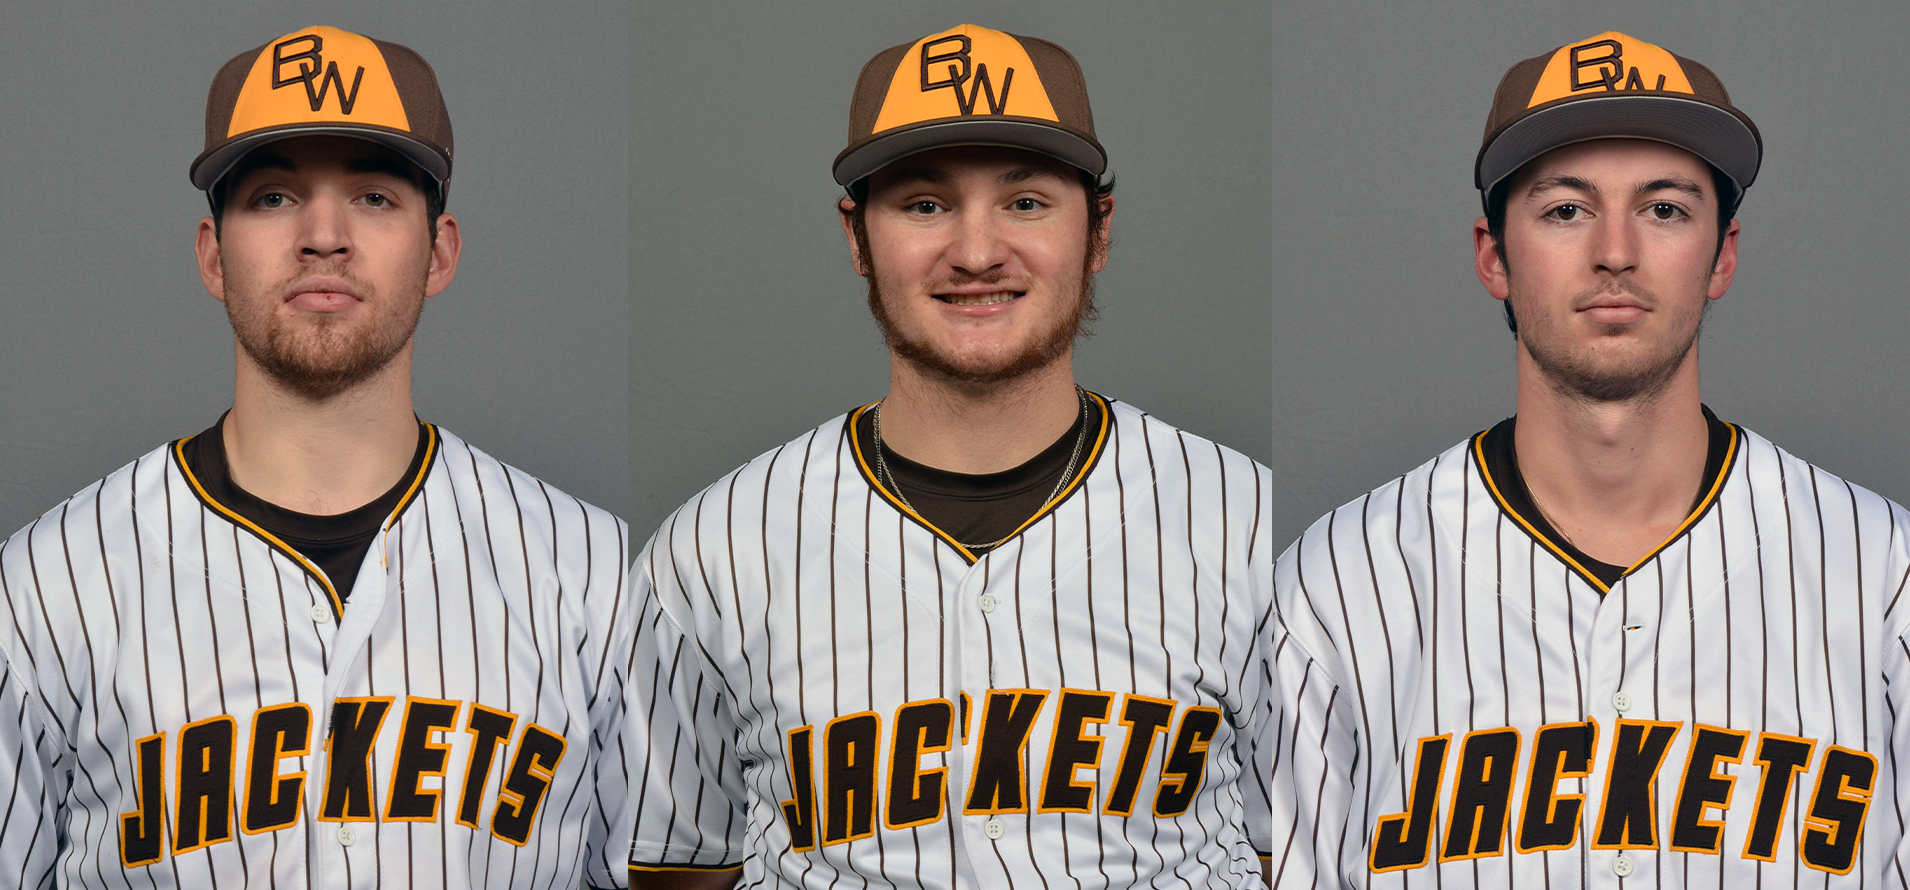 D3baseball.com All-Region 7 Selections (from left to right): Luke Vonderhaar, Alex Ludwick, and Vincent Capolupo